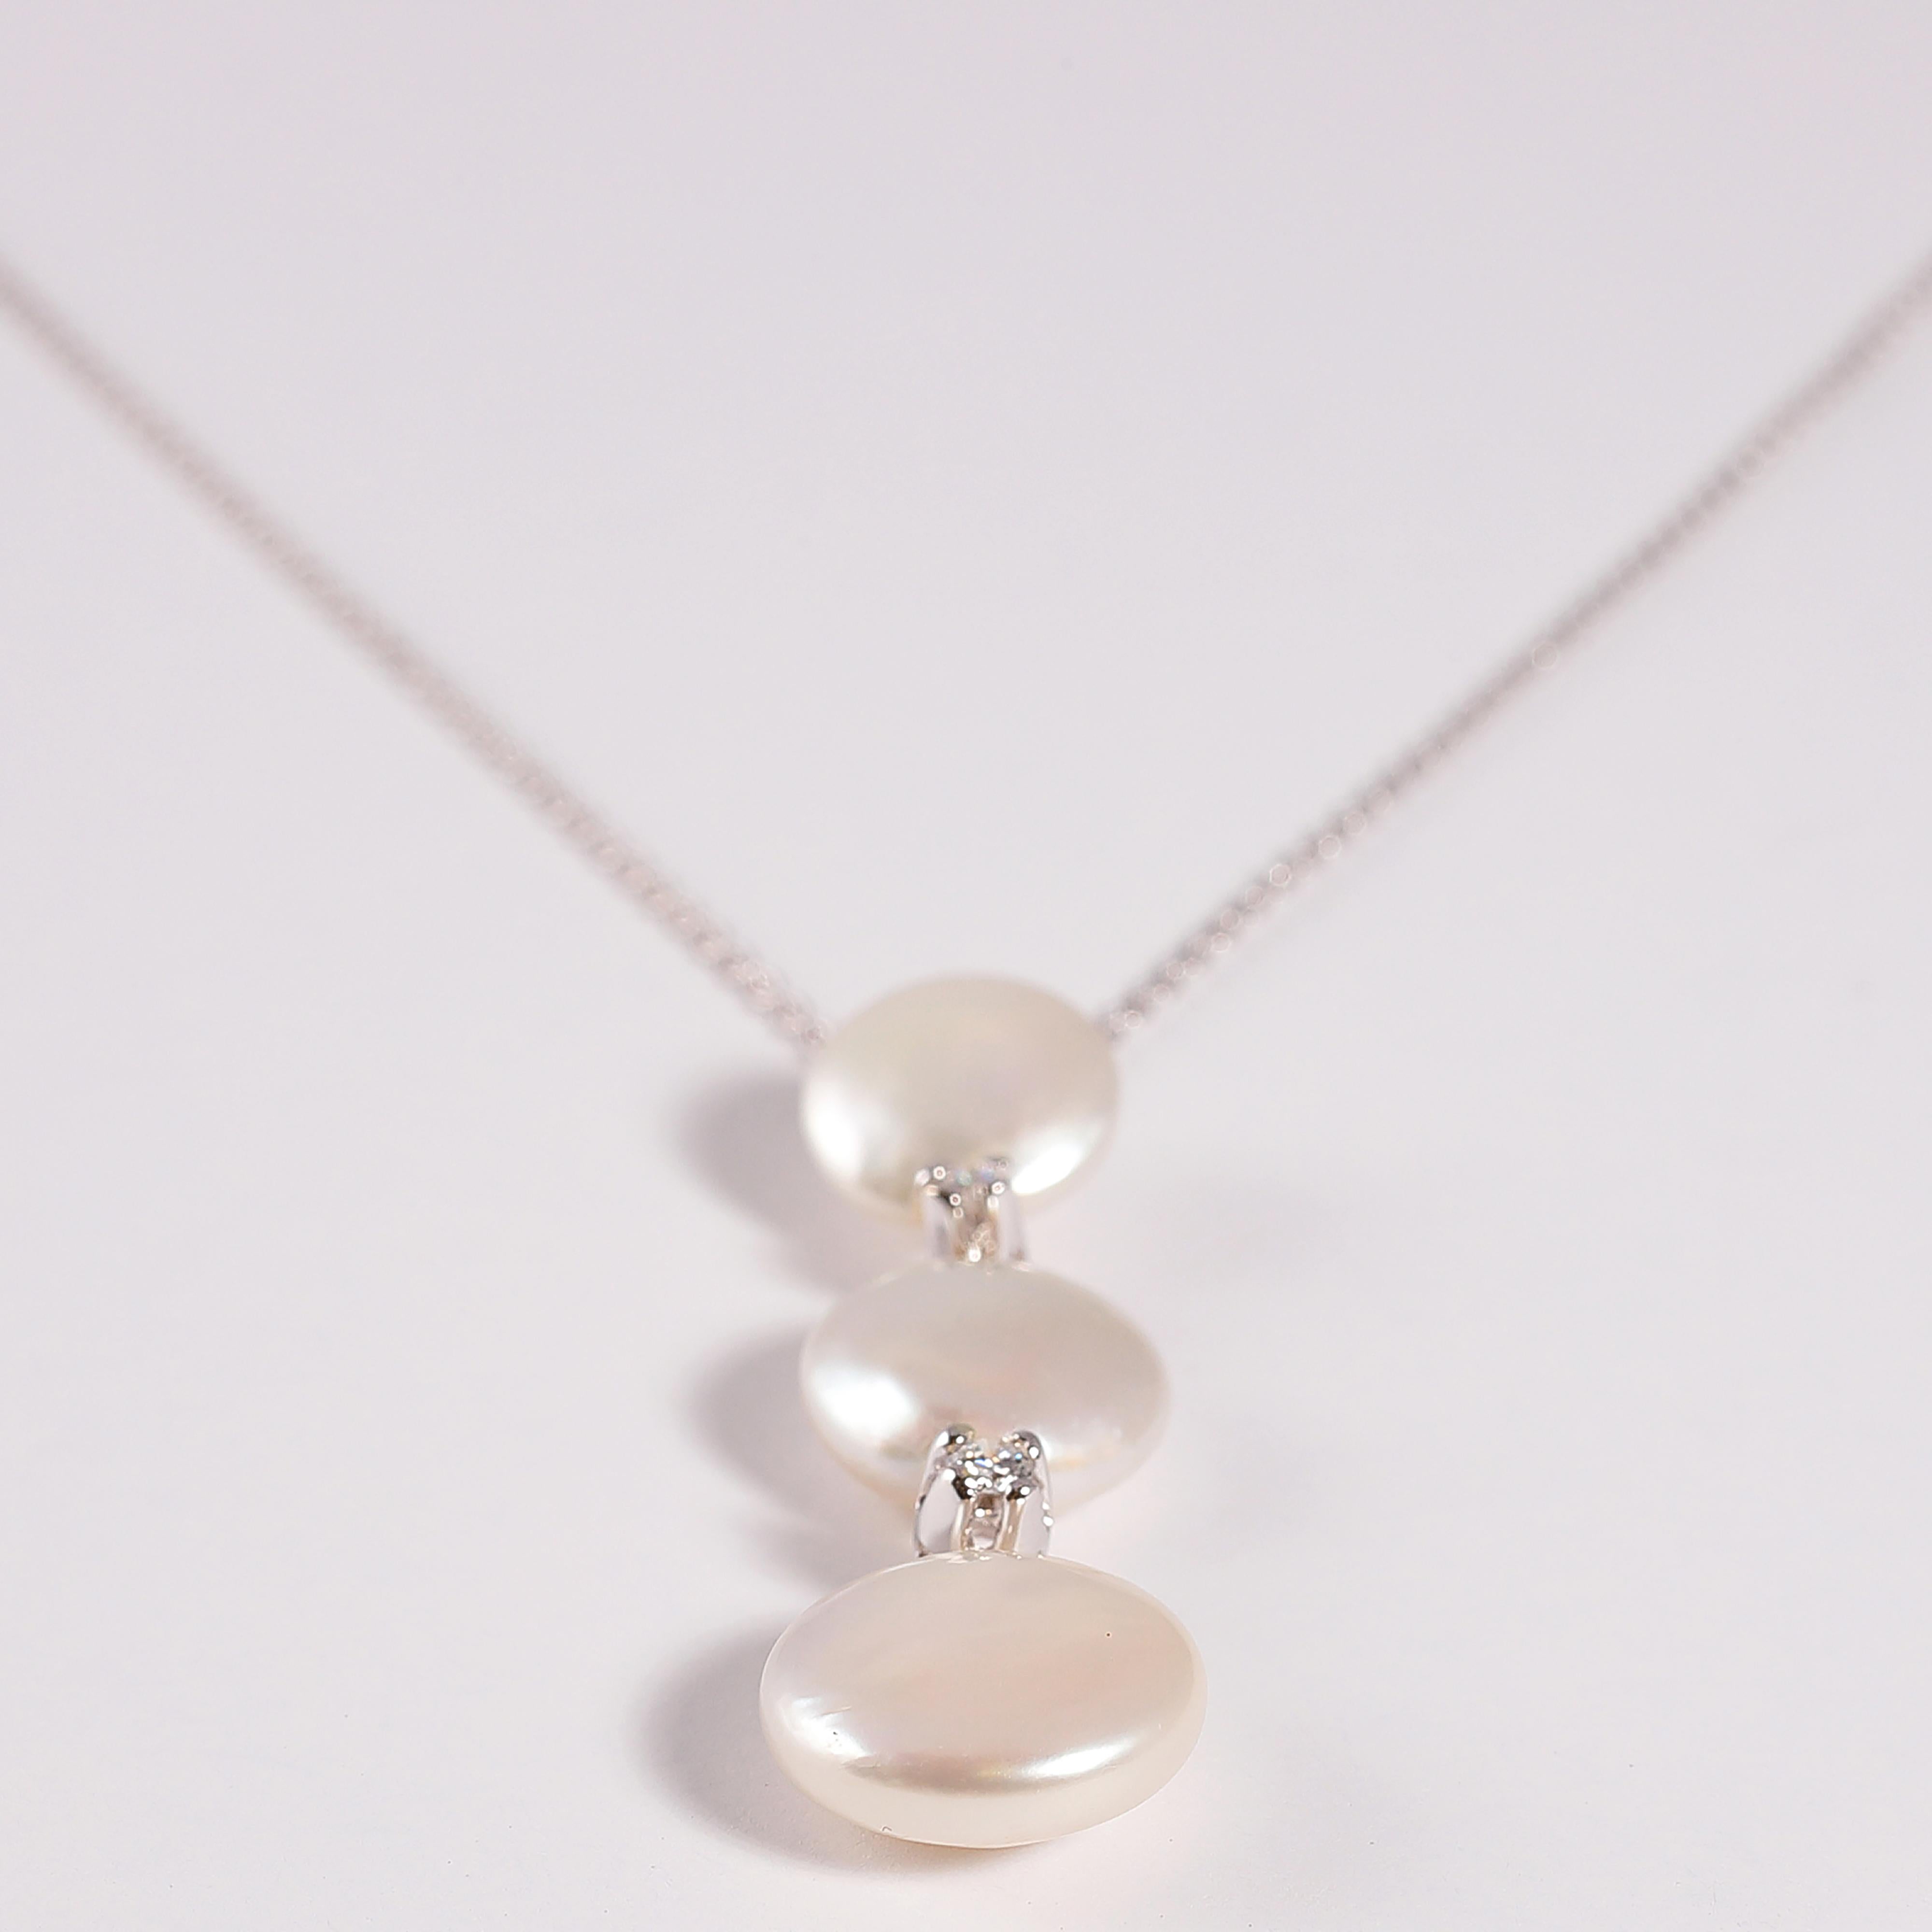 This 18 karat white gold, 16 1/4 inch chain suspends a white gold drop measuring 1 1/2 inches that supports three Biwa cultured pearls and two round diamonds, all by famed designer Yvel!  